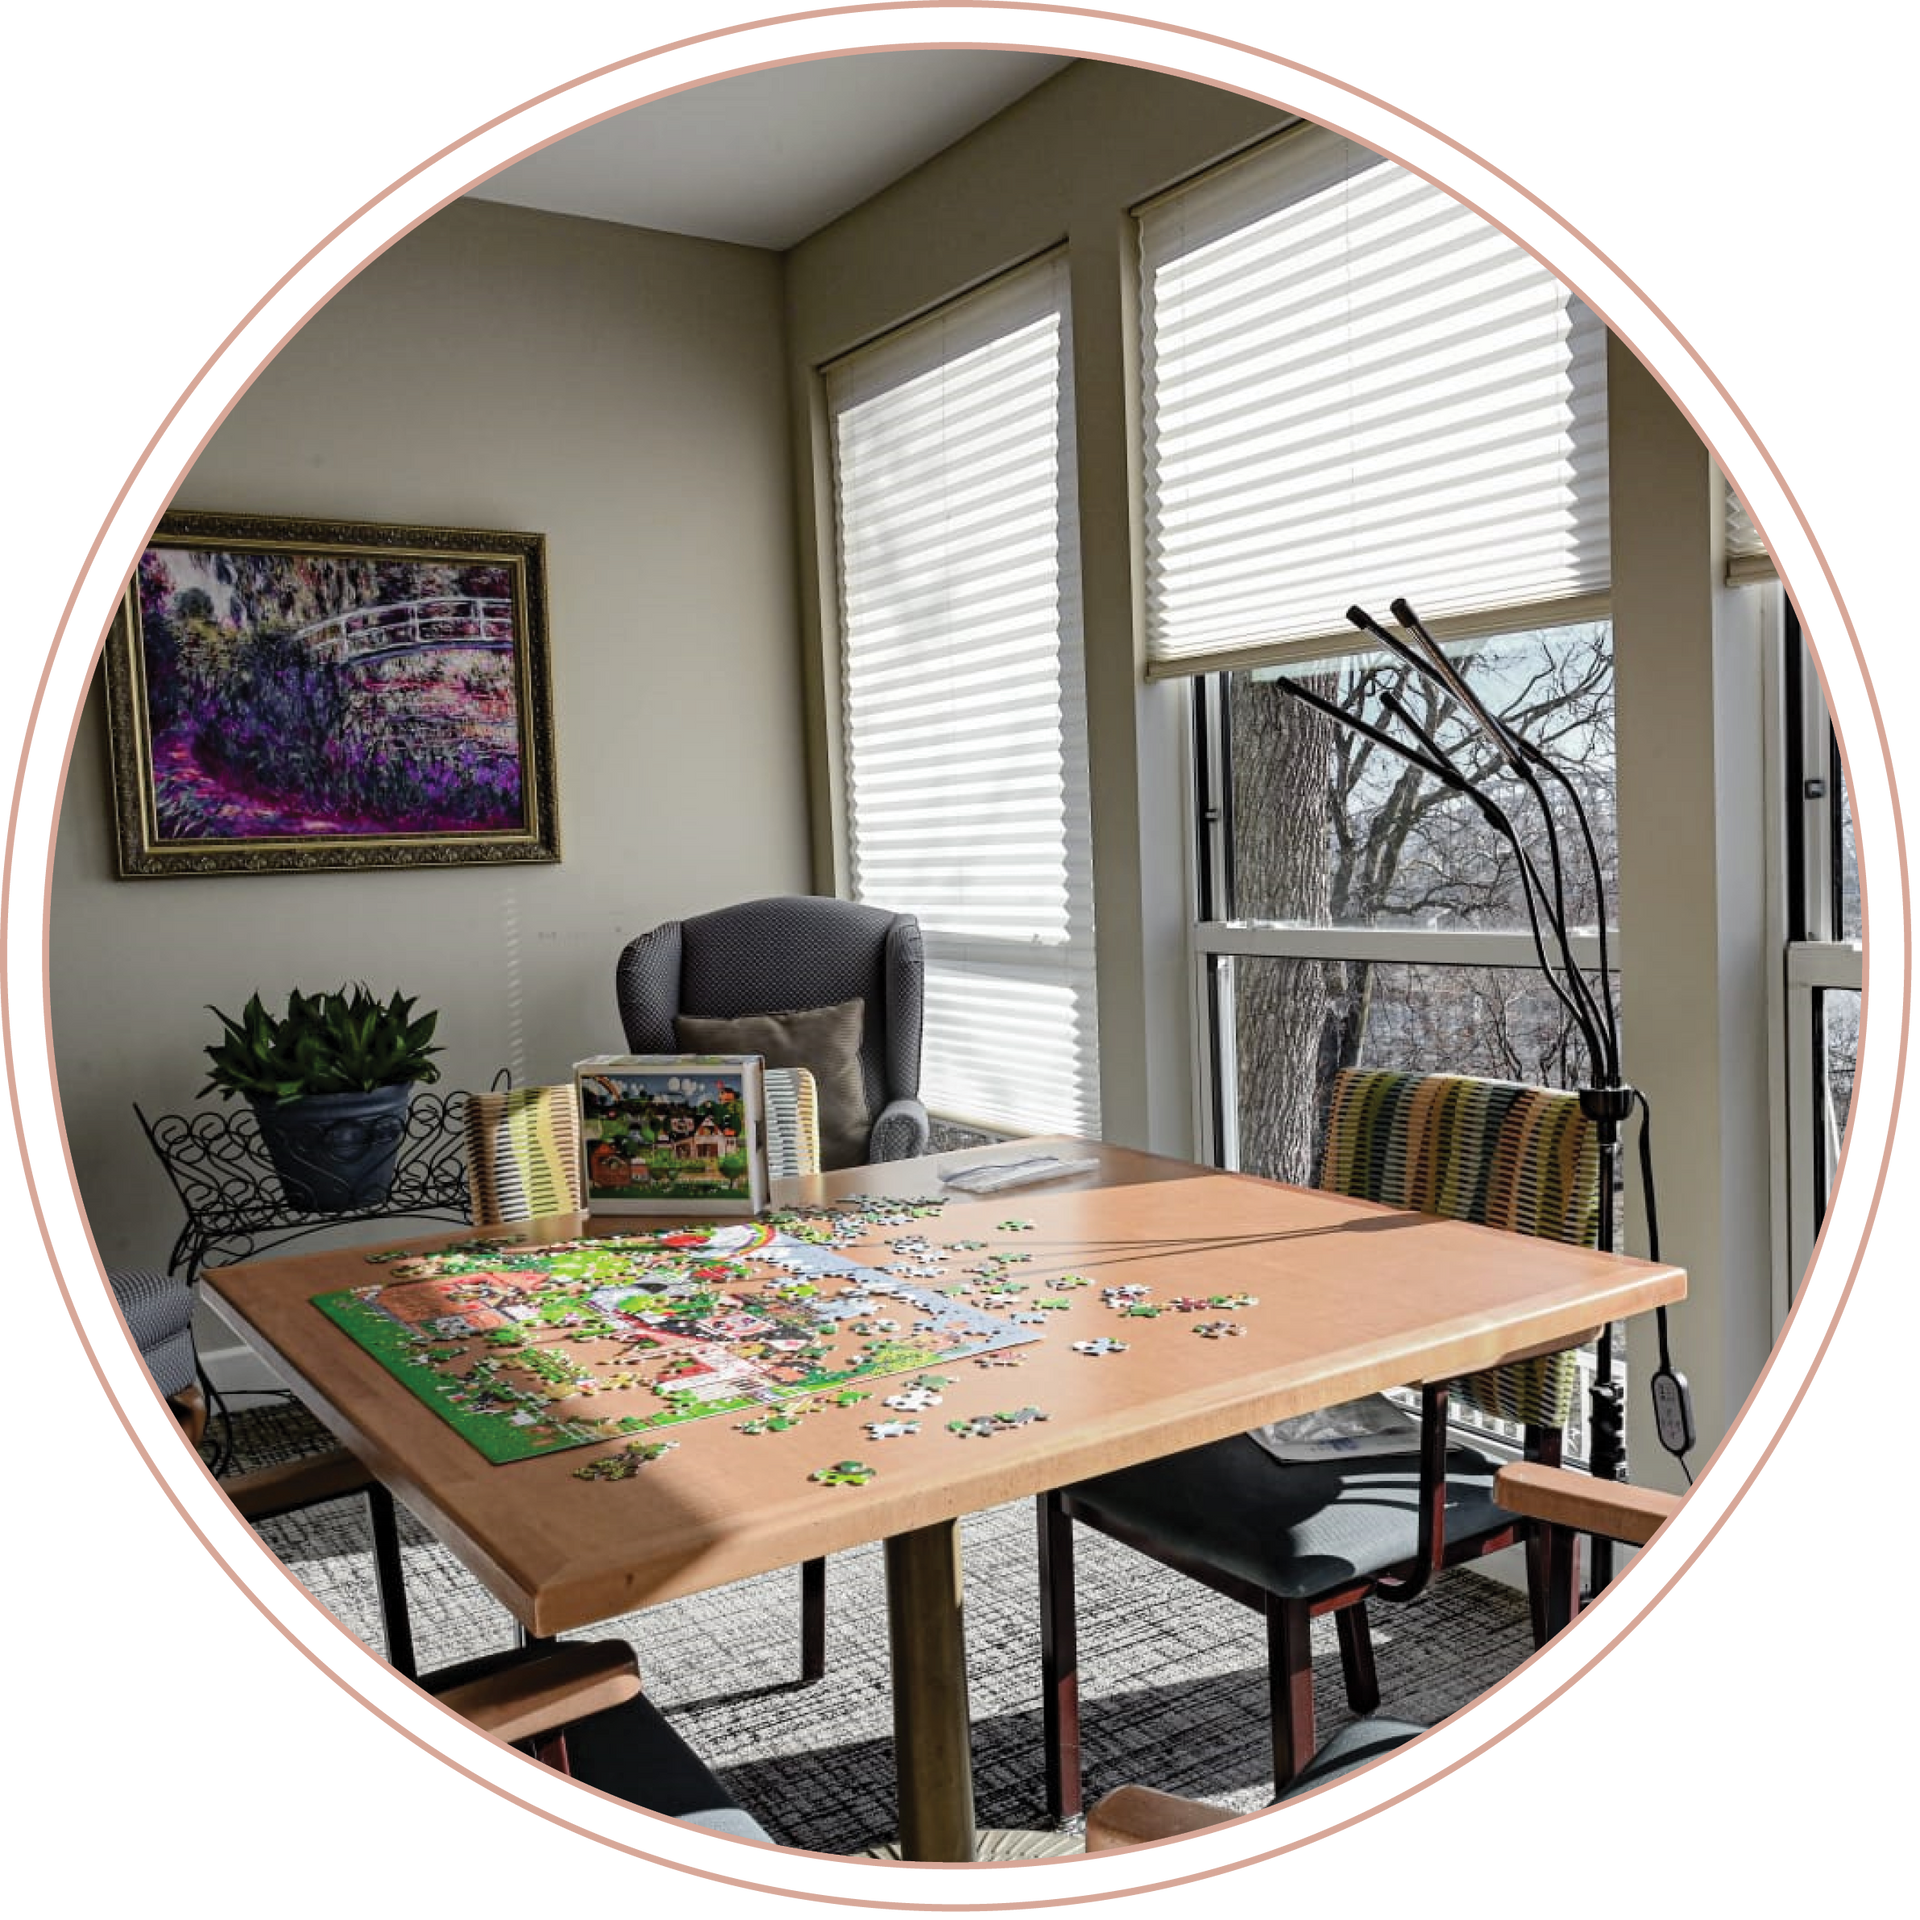 A table with a puzzle on it in a living room